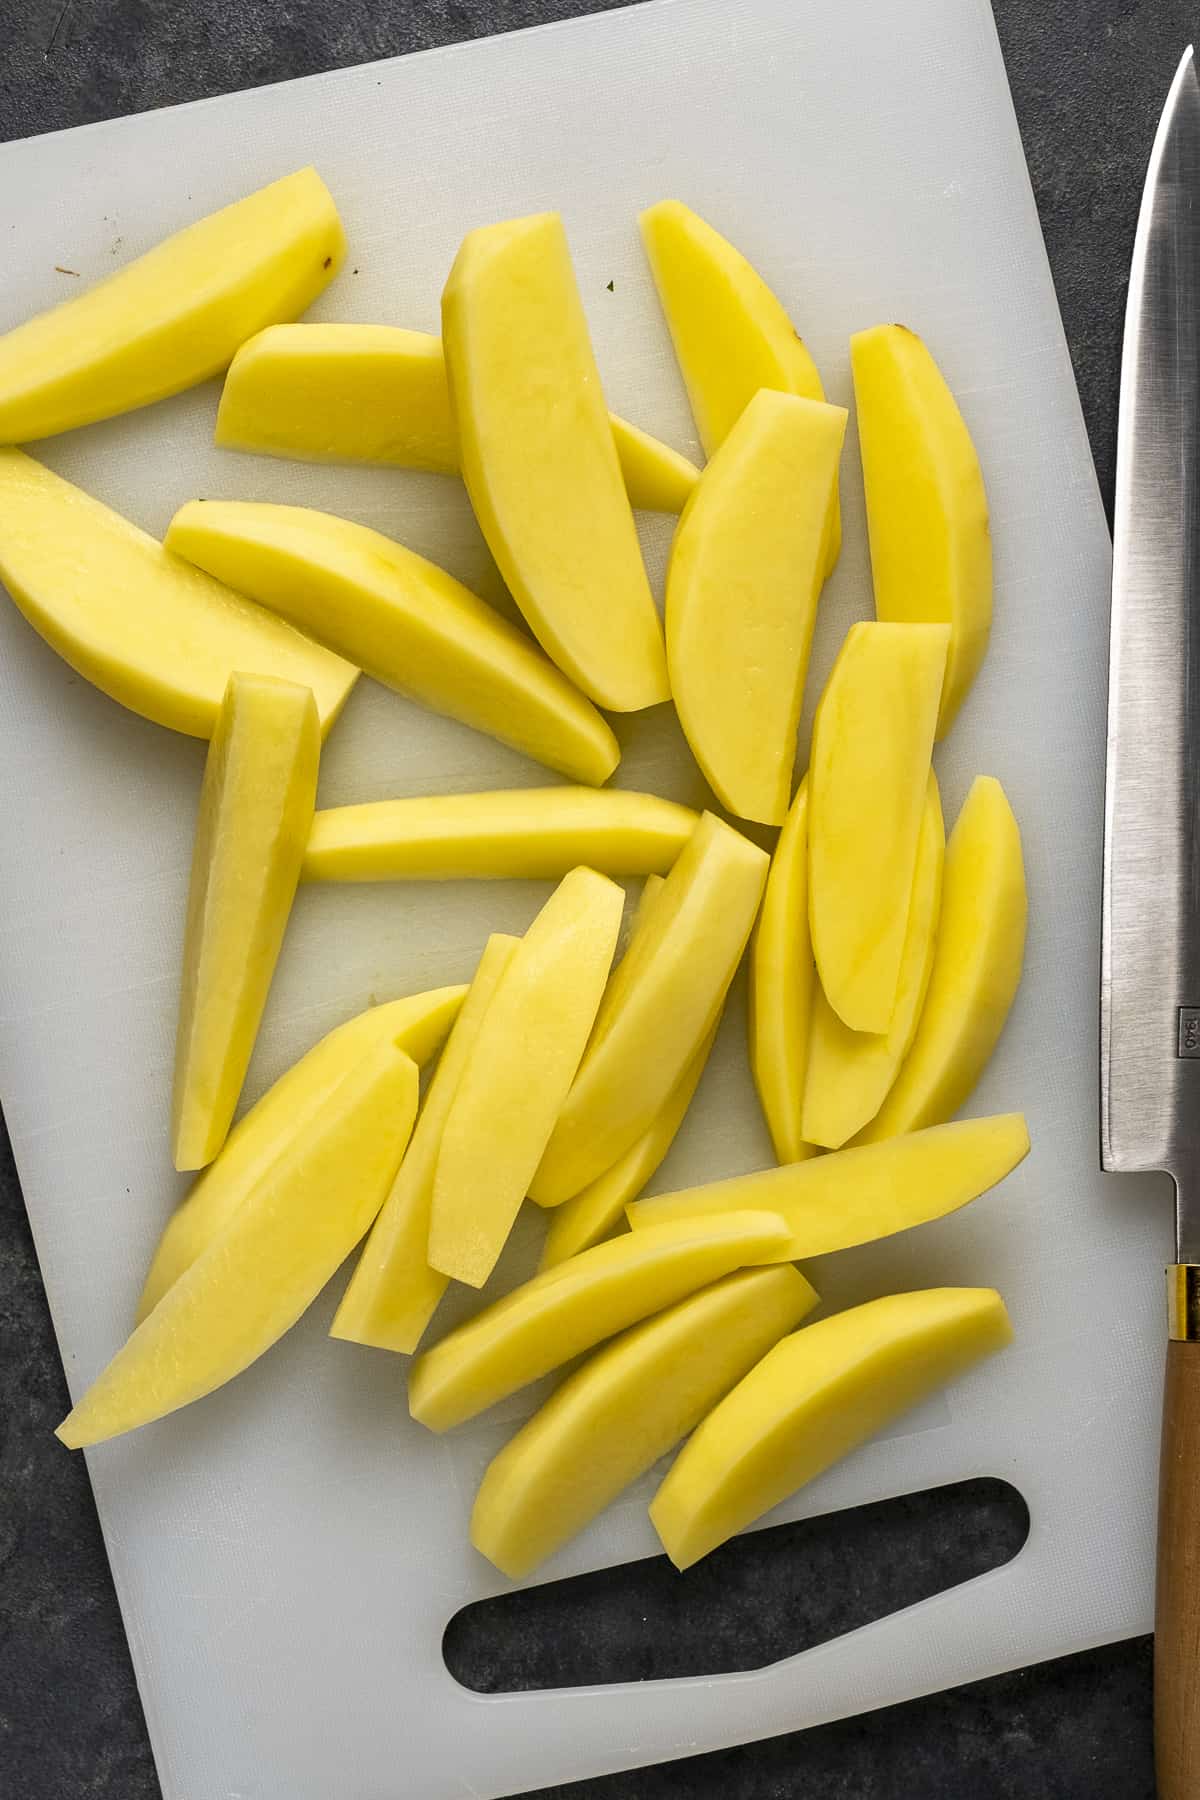 Thick potato slices on a cutting board.